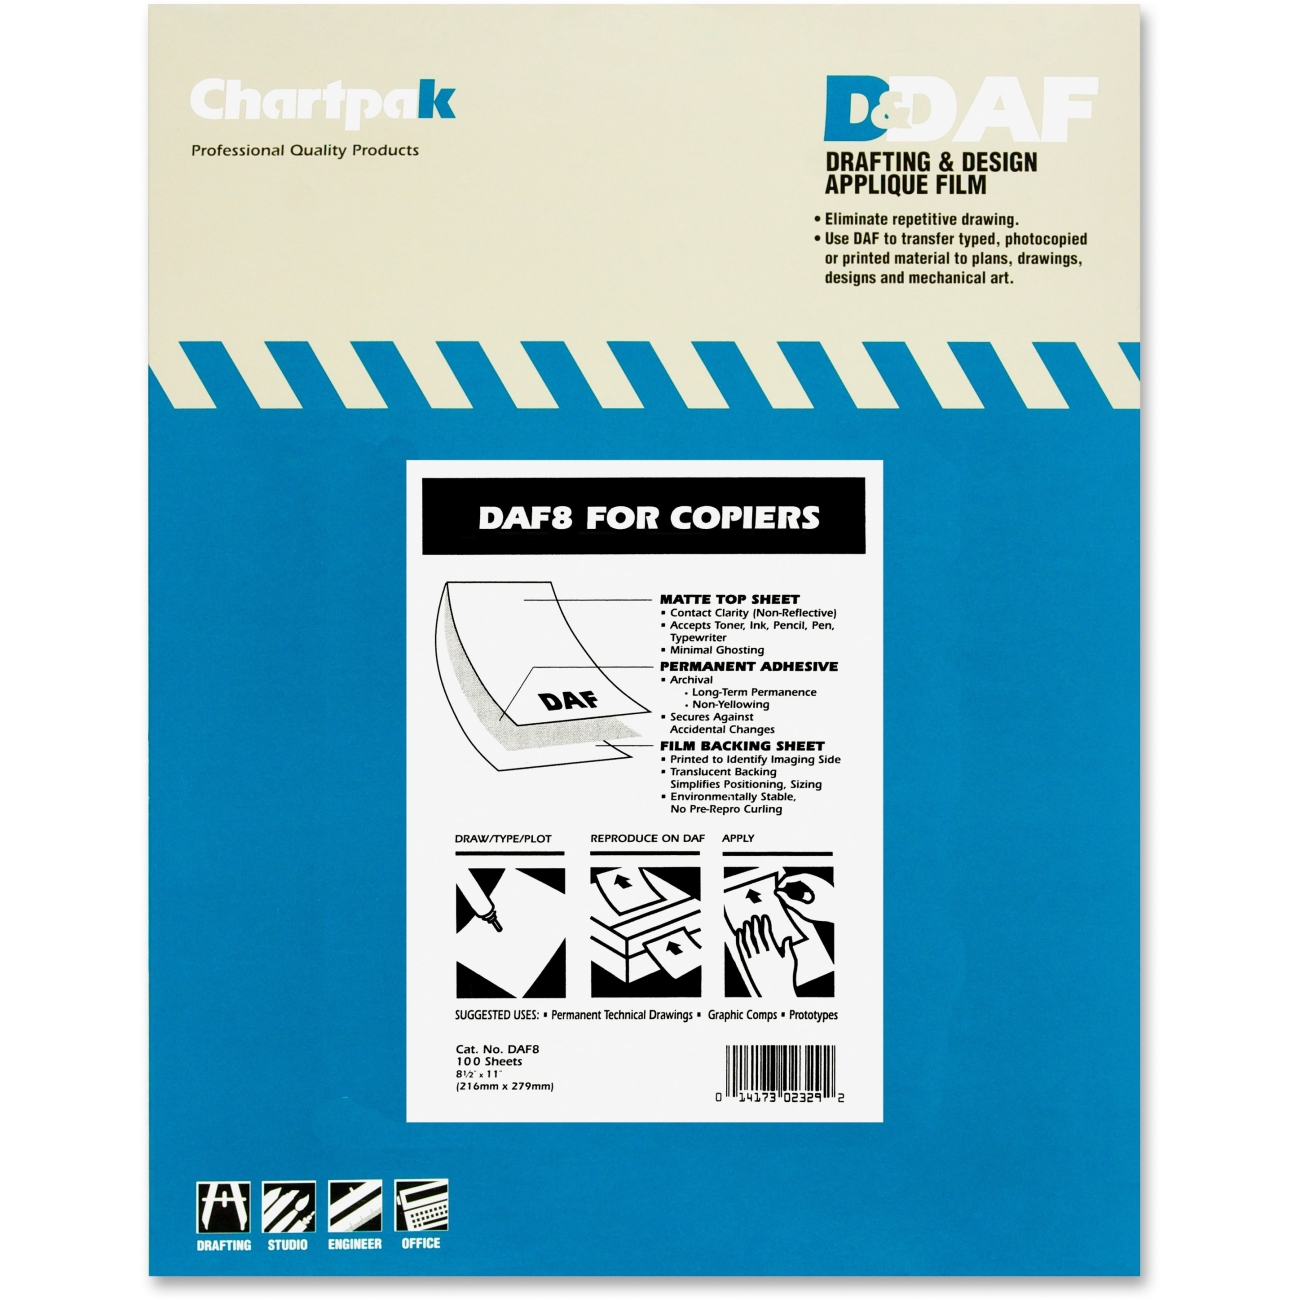 Chartpak Printer Papers, Speciality Papers & Pads